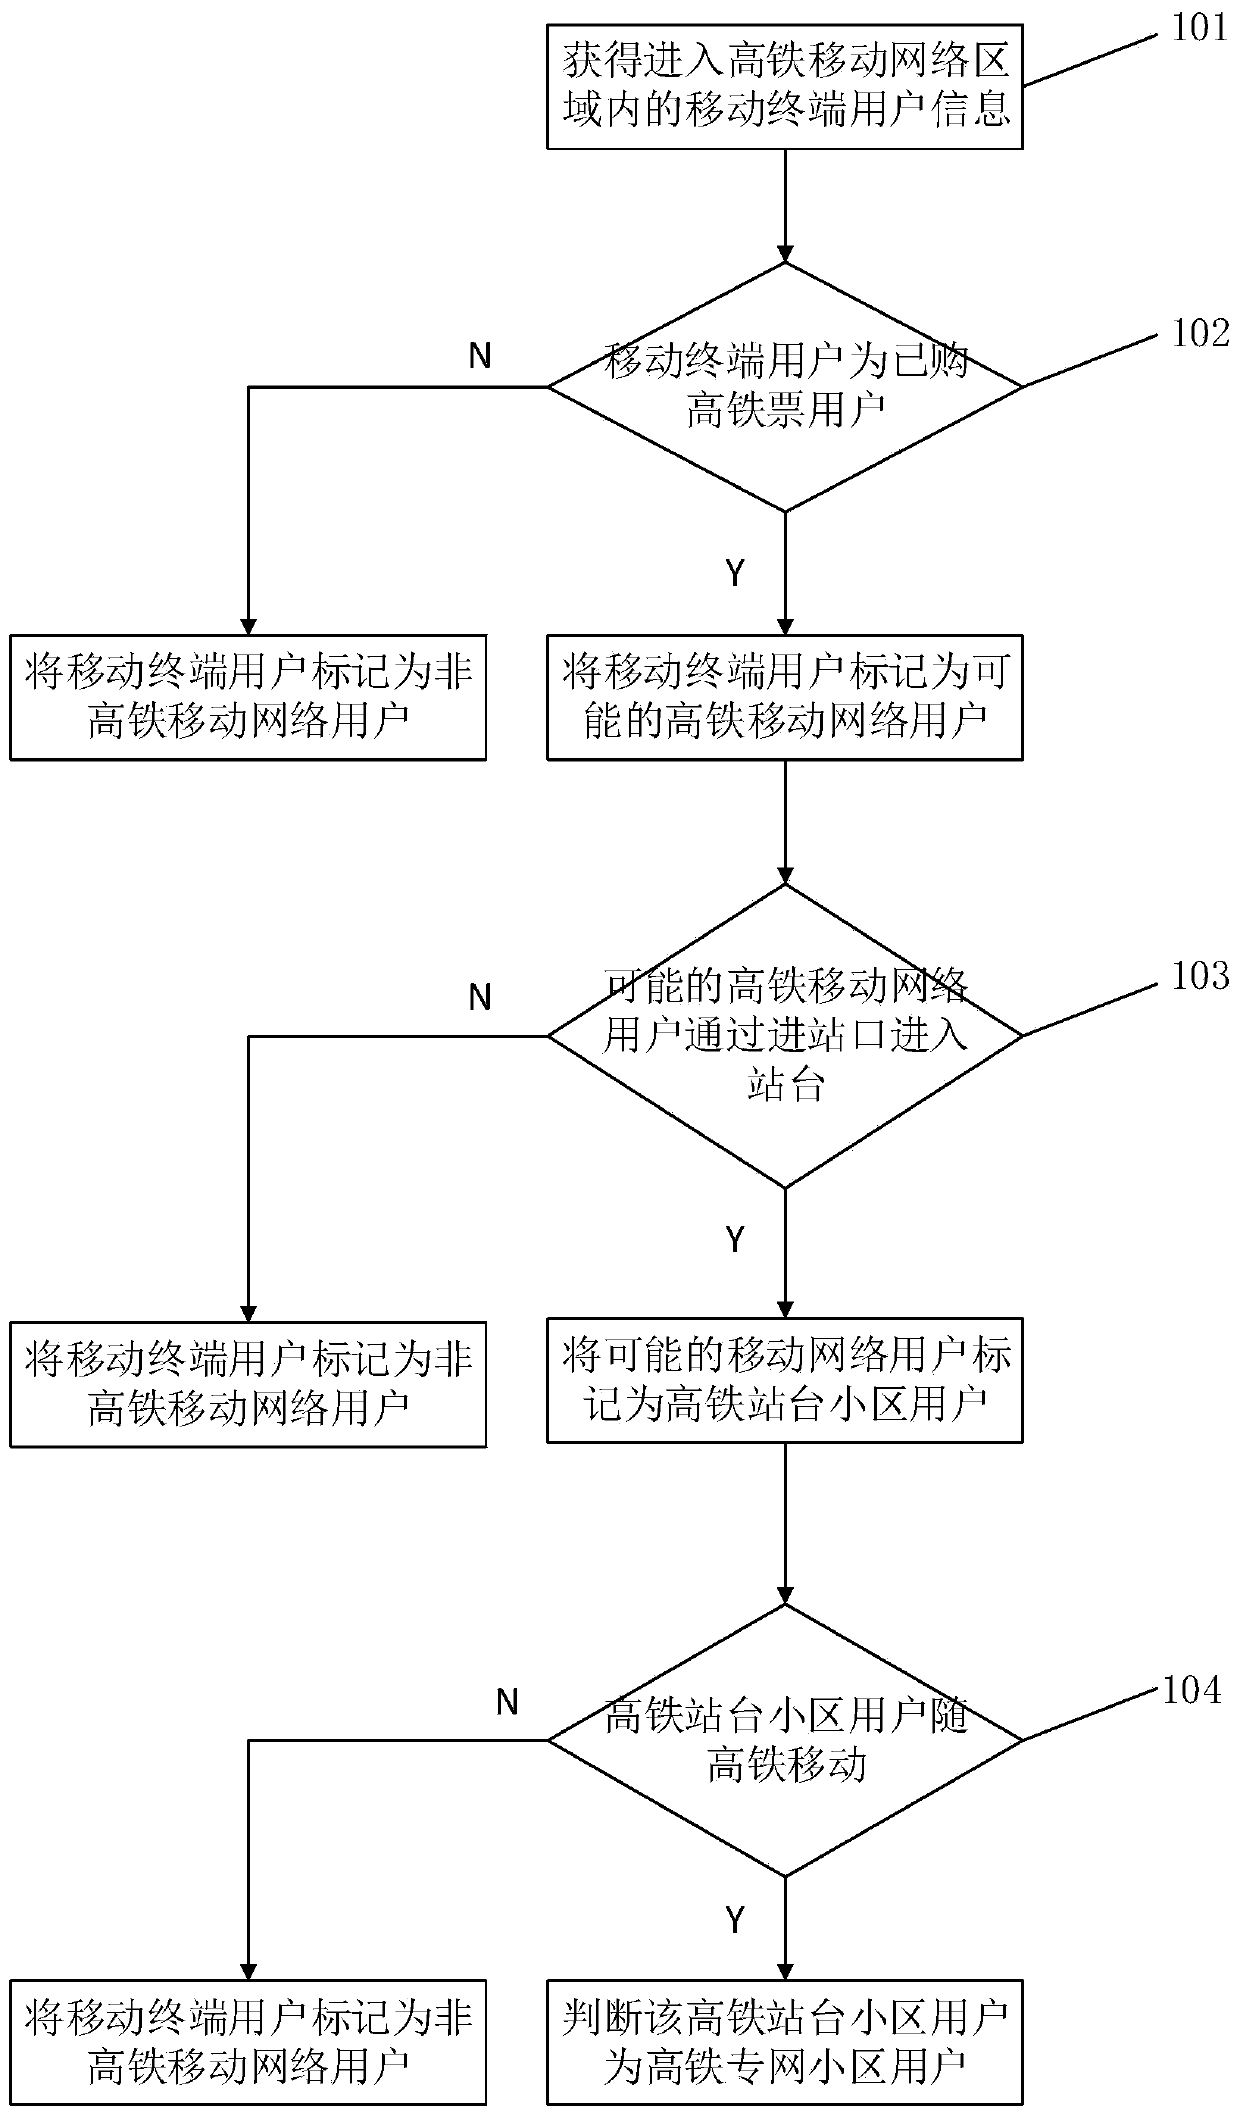 High-speed rail mobile network user identification method and system